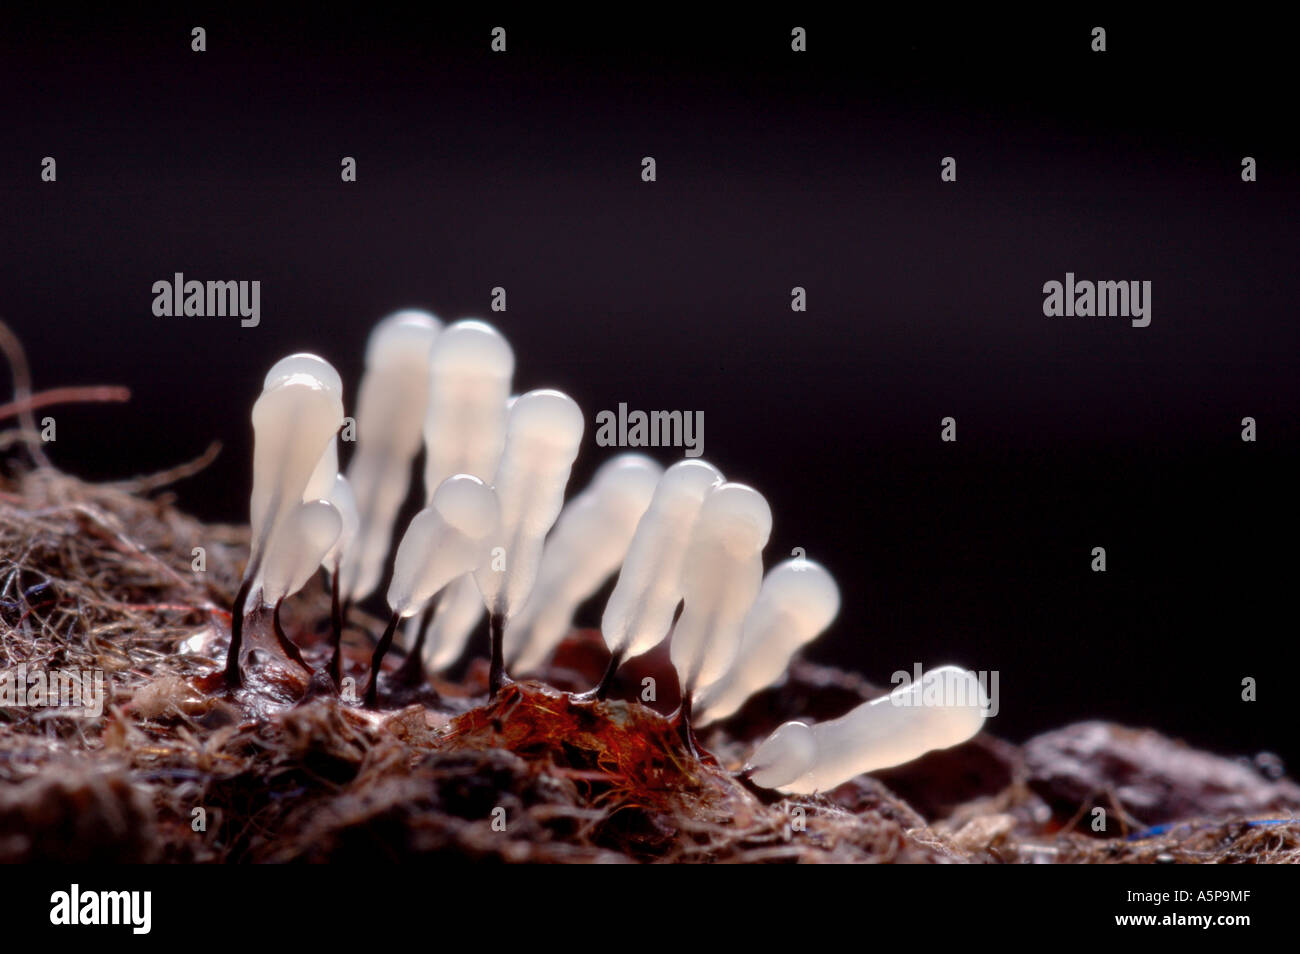 Sausage shaped white translucent fruiting bodies of slime mould or myxomycete Stemonitis splendens growing on the wood Stock Photo